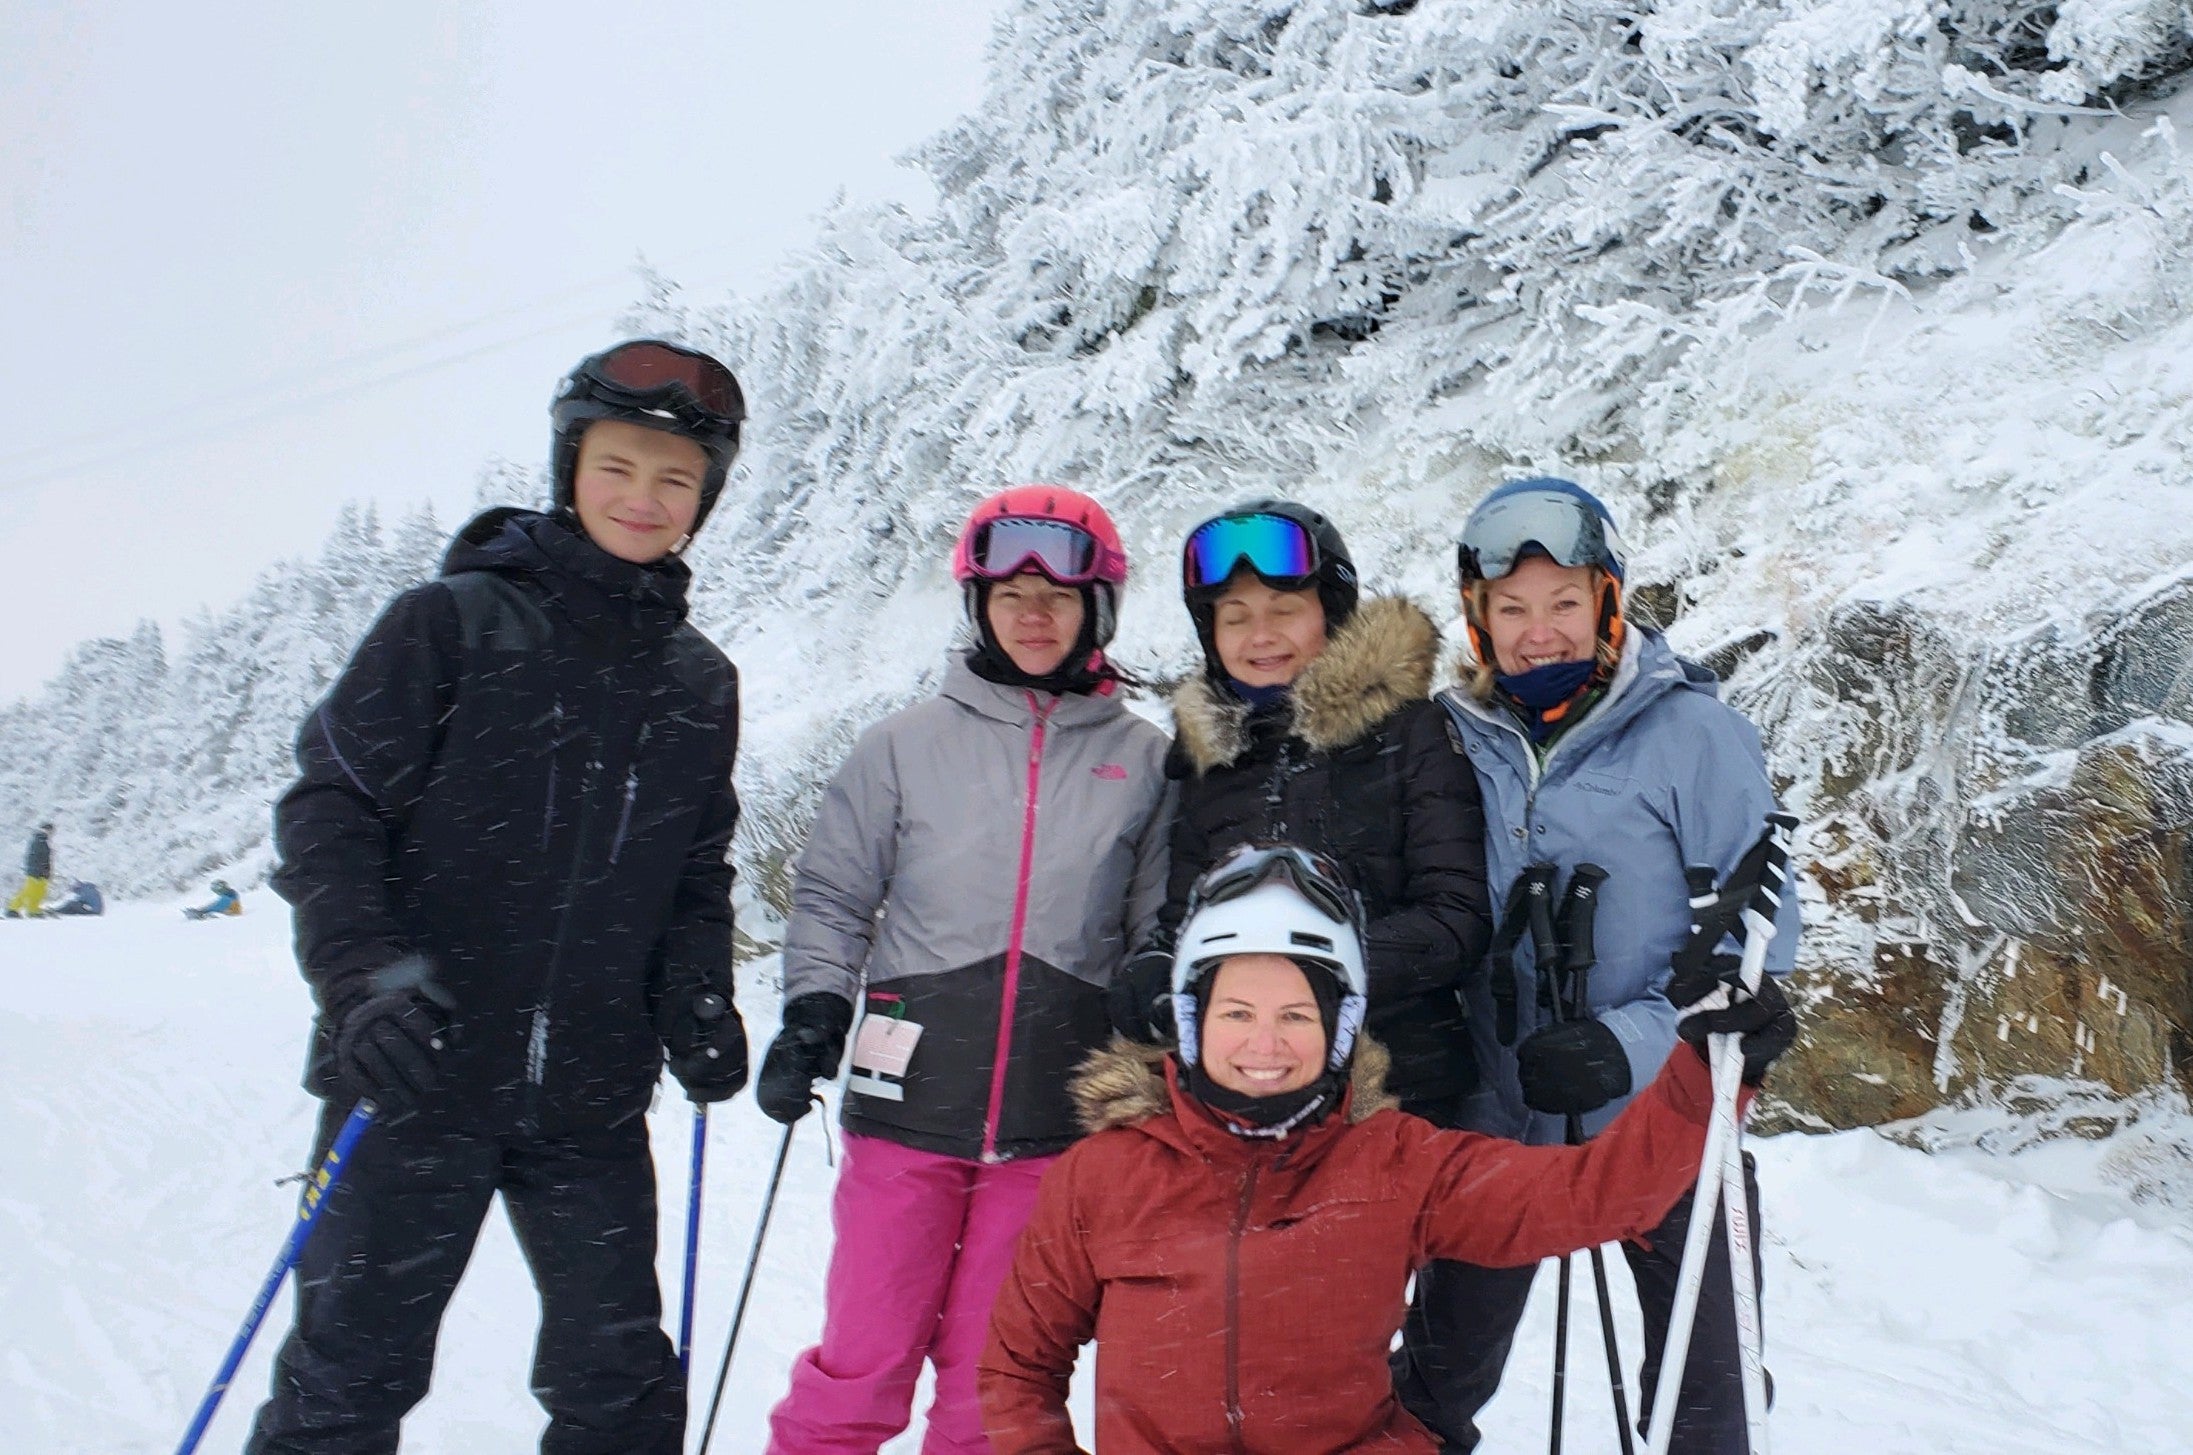 Family ski vacation, 5 people wearing winter ski clothing and holding ski poles, posing for a group photo with snow covered trees in the background.